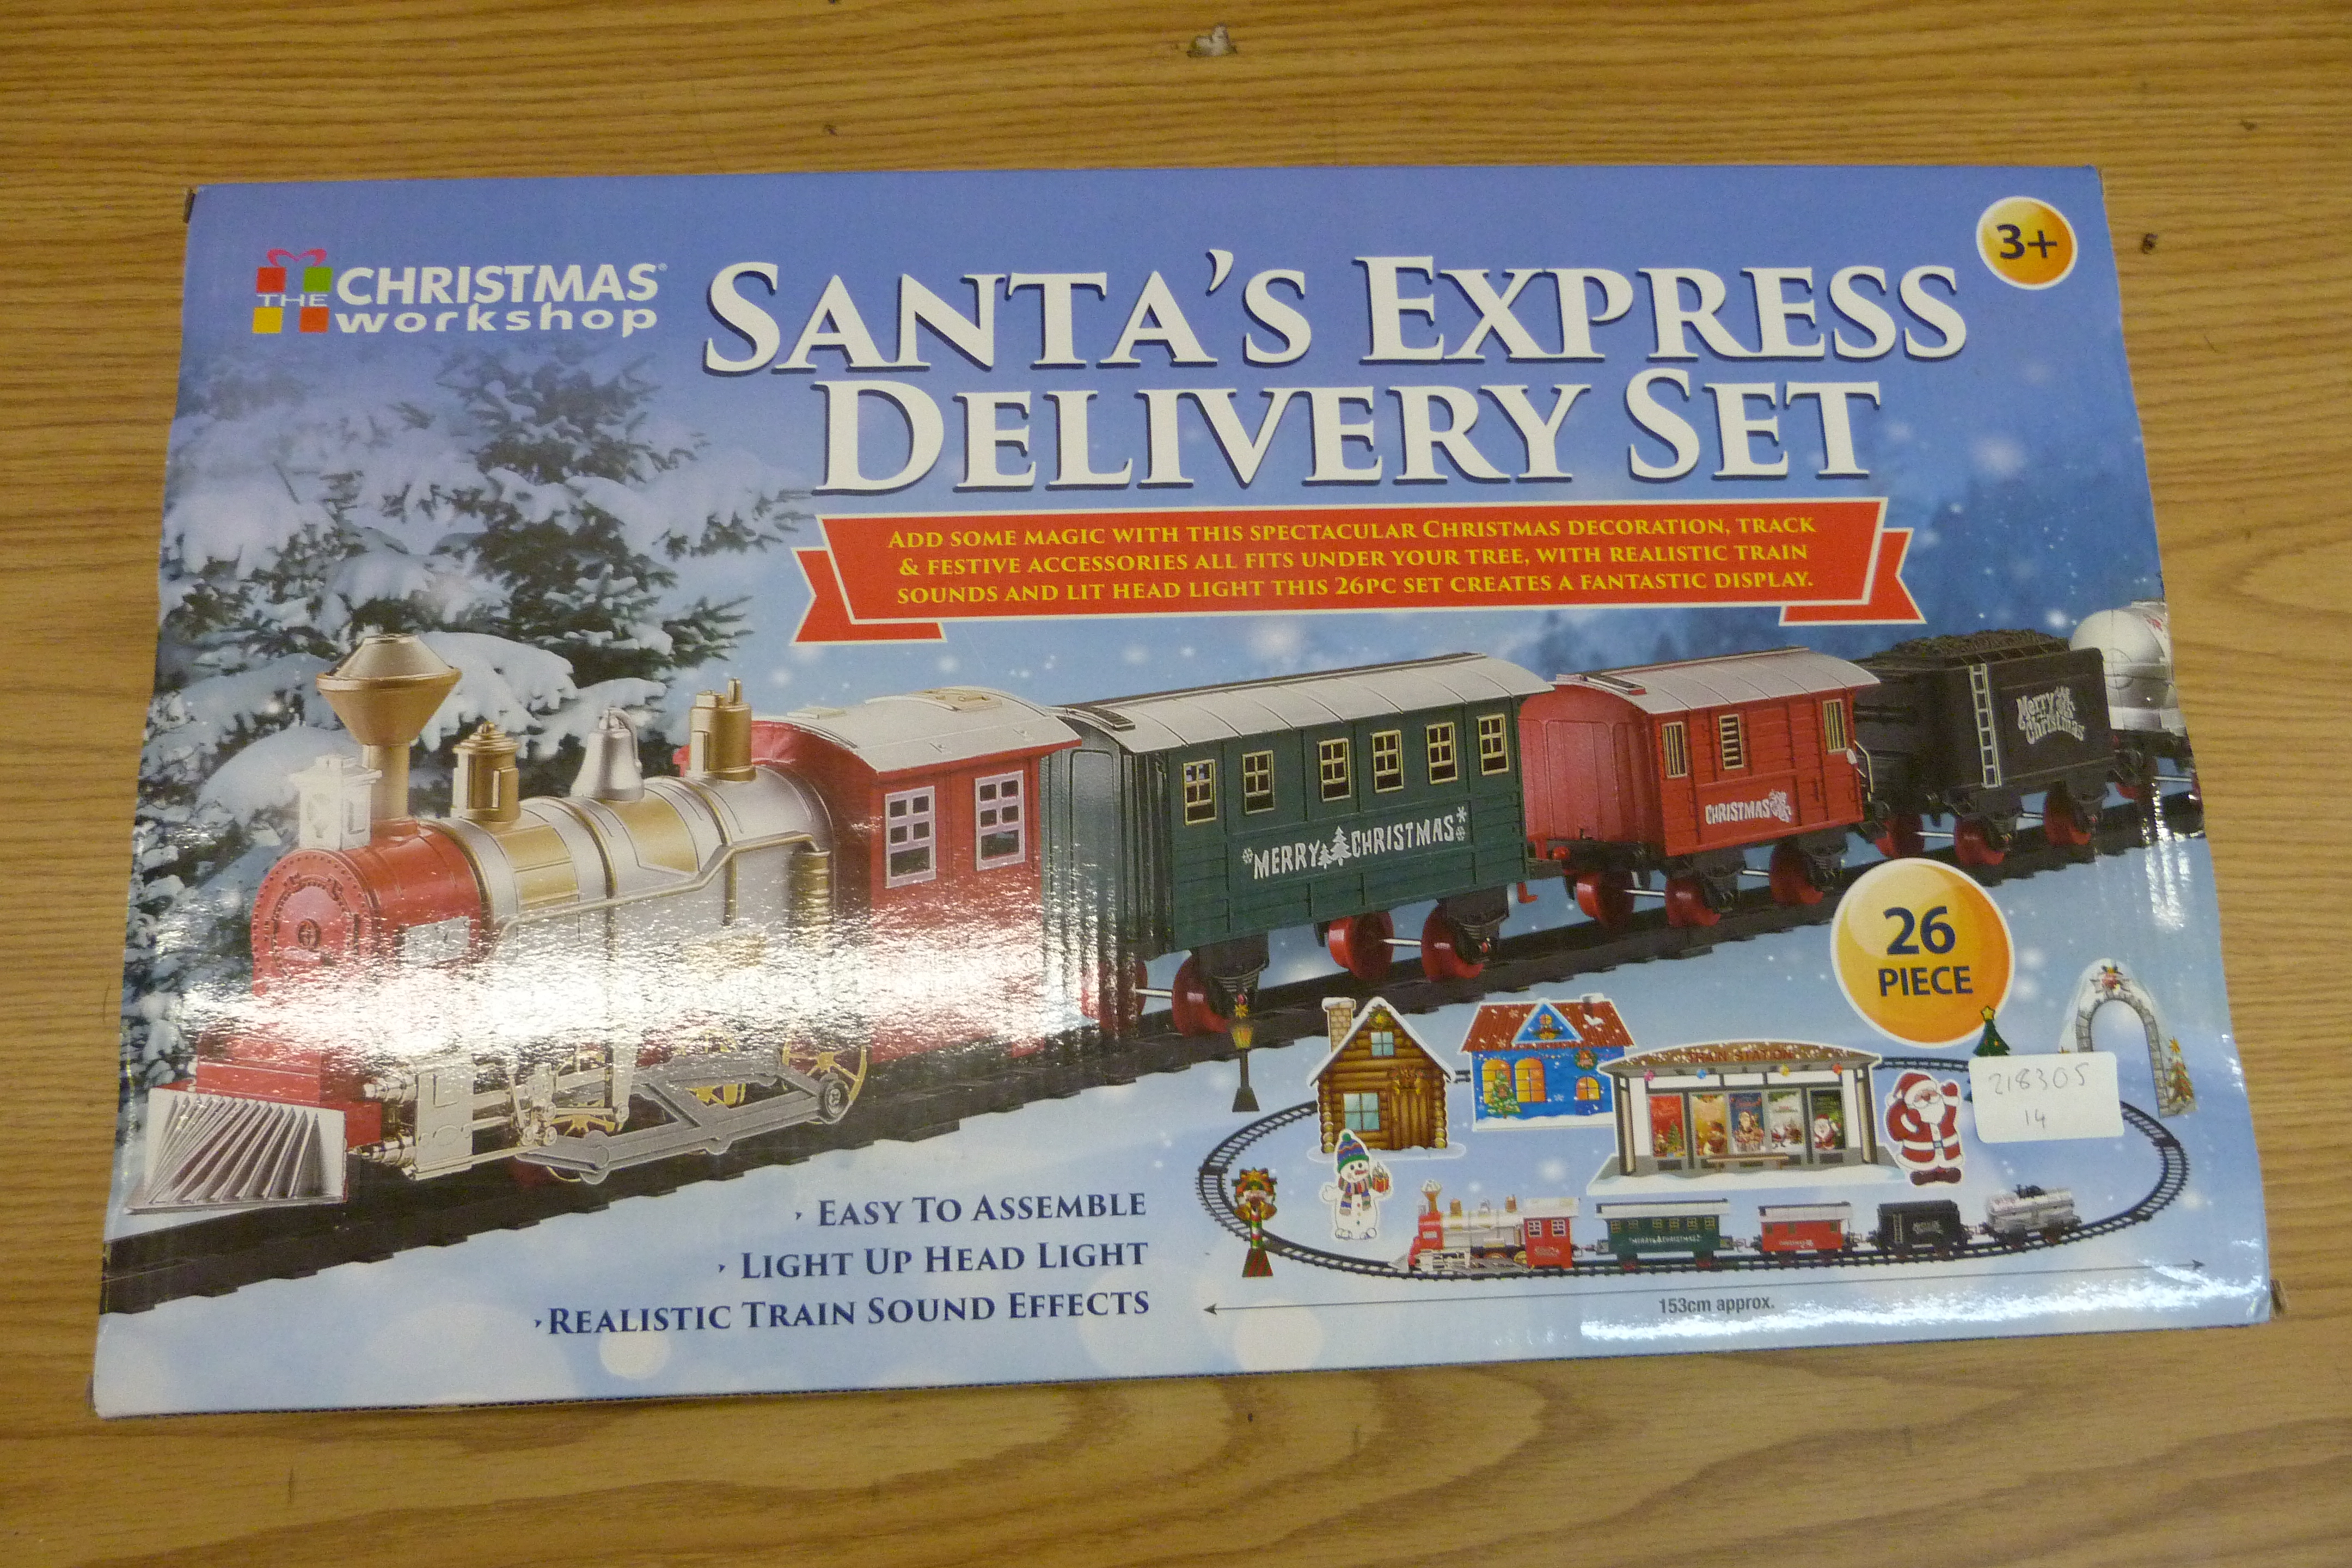 Star Wars Lego, a Radio Shack vintage Porsche 928 RC car and a Santa's Express Delivery Set - Image 4 of 4